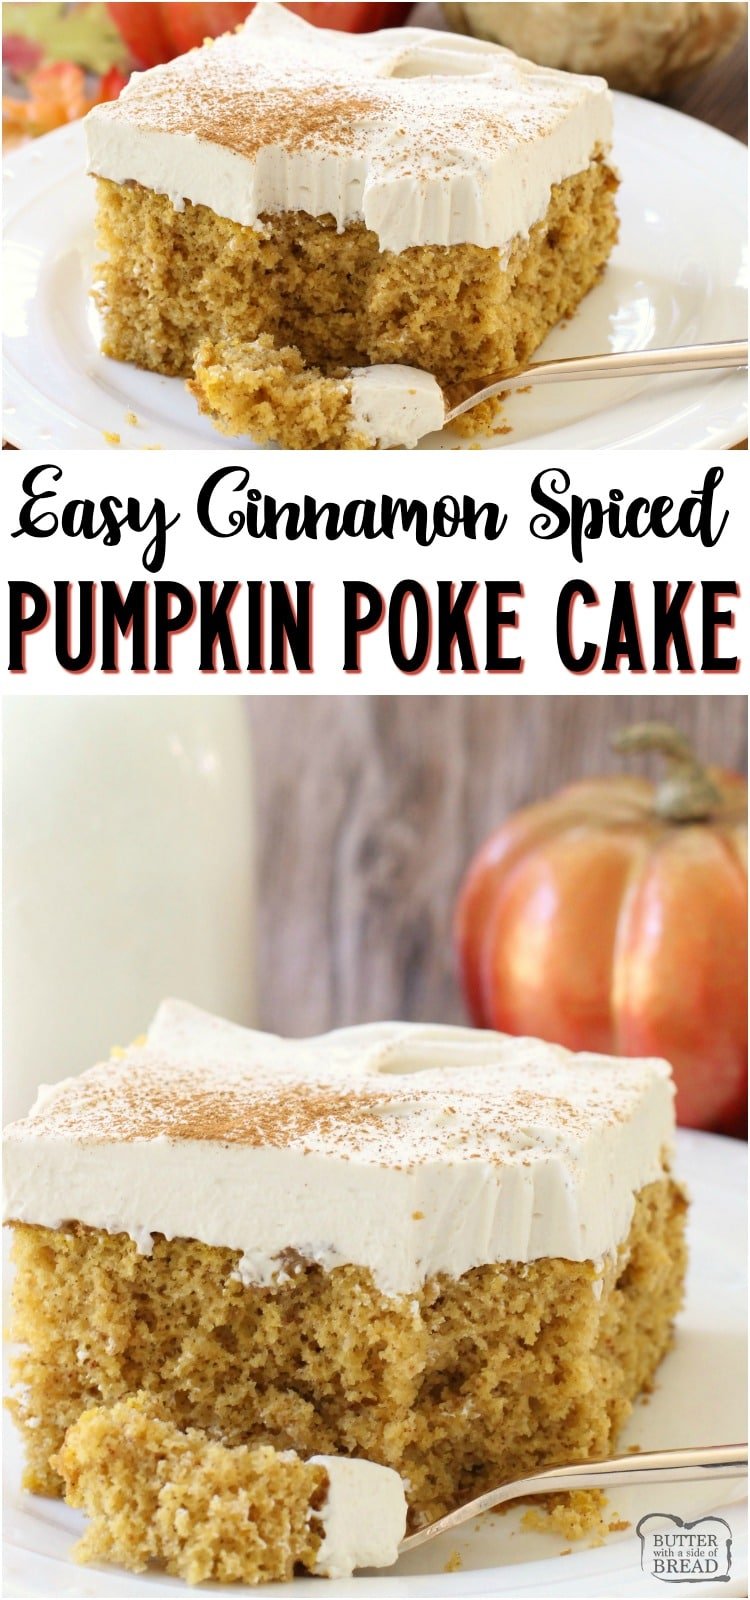 Pumpkin Poke Cake takes an ordinary cake mix and turns it into this deliciously festive Fall treat filled with pumpkin, cinnamon, and nutmeg. #pumpkin #cake #pokecake #cinnamon #baking #Fall #recipe #dessert from BUTTER WITH A SIDE OF BREAD